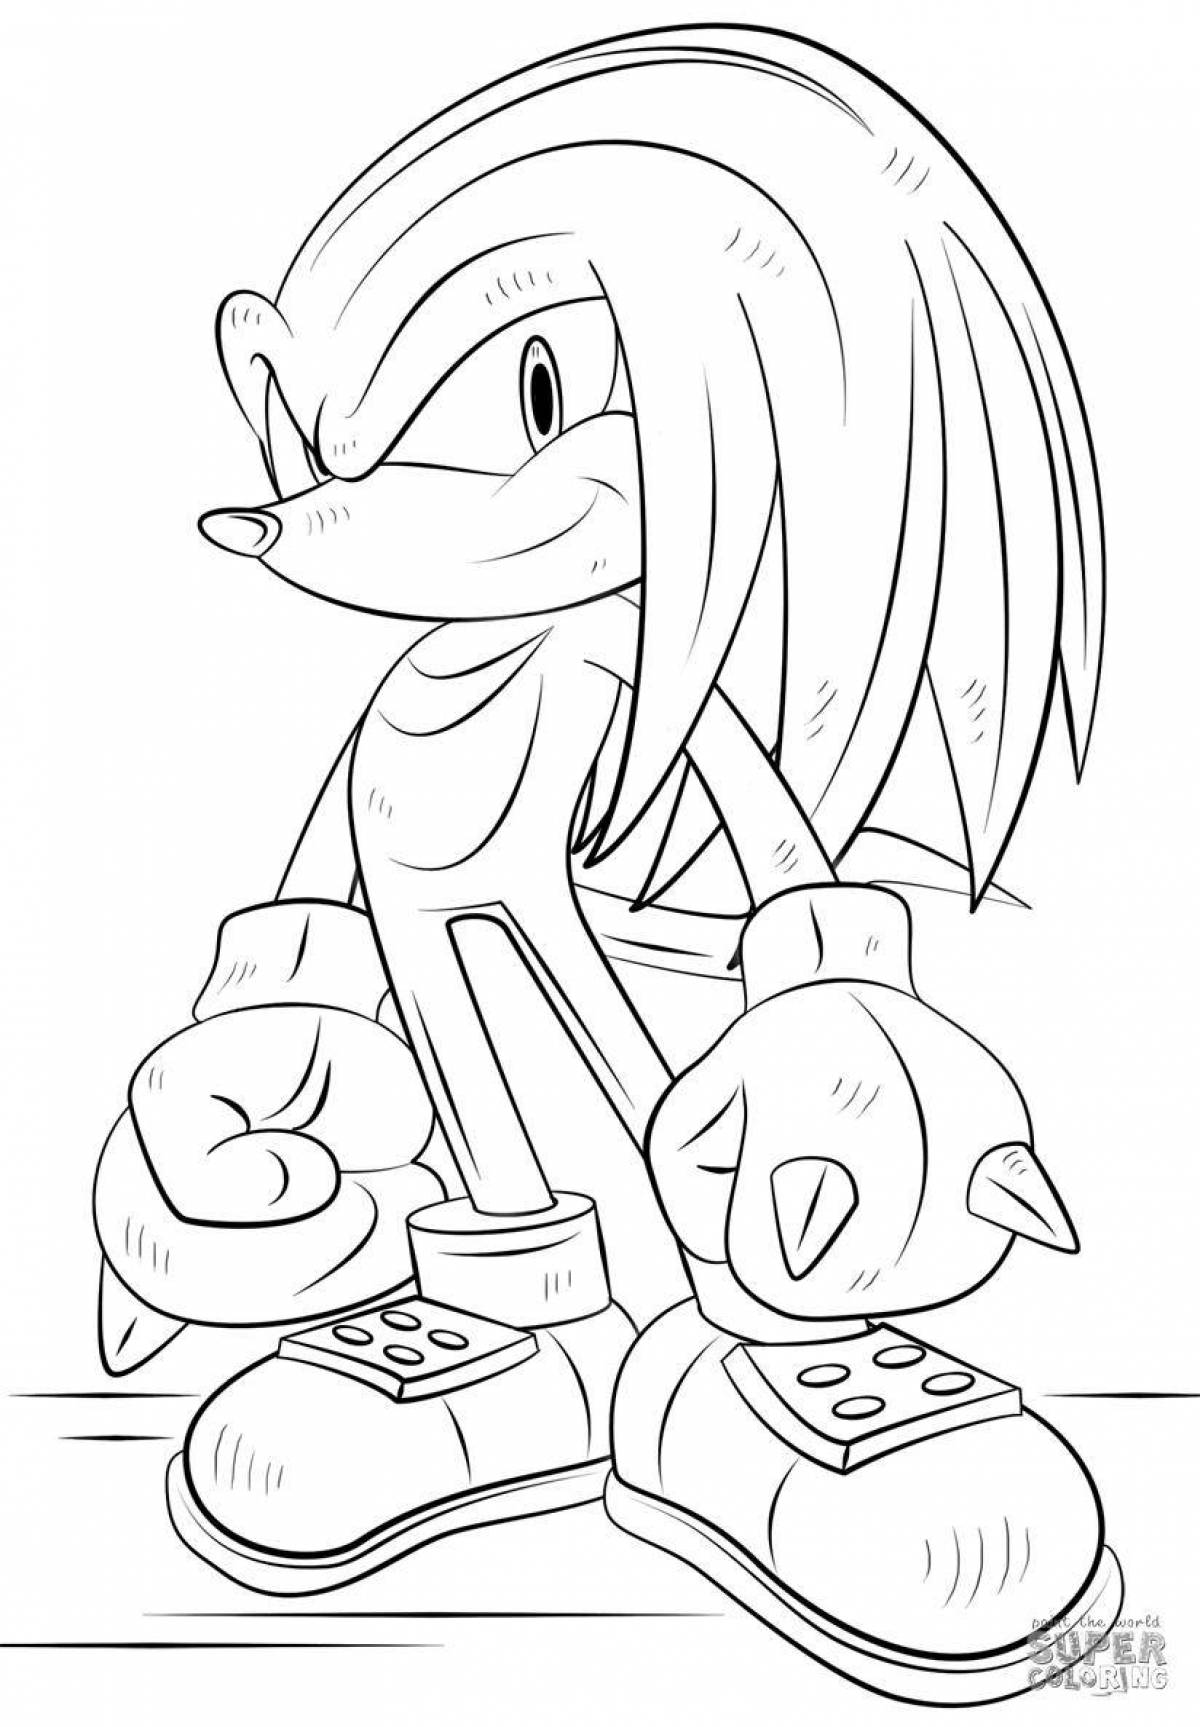 Sonic knuckles incredible coloring book